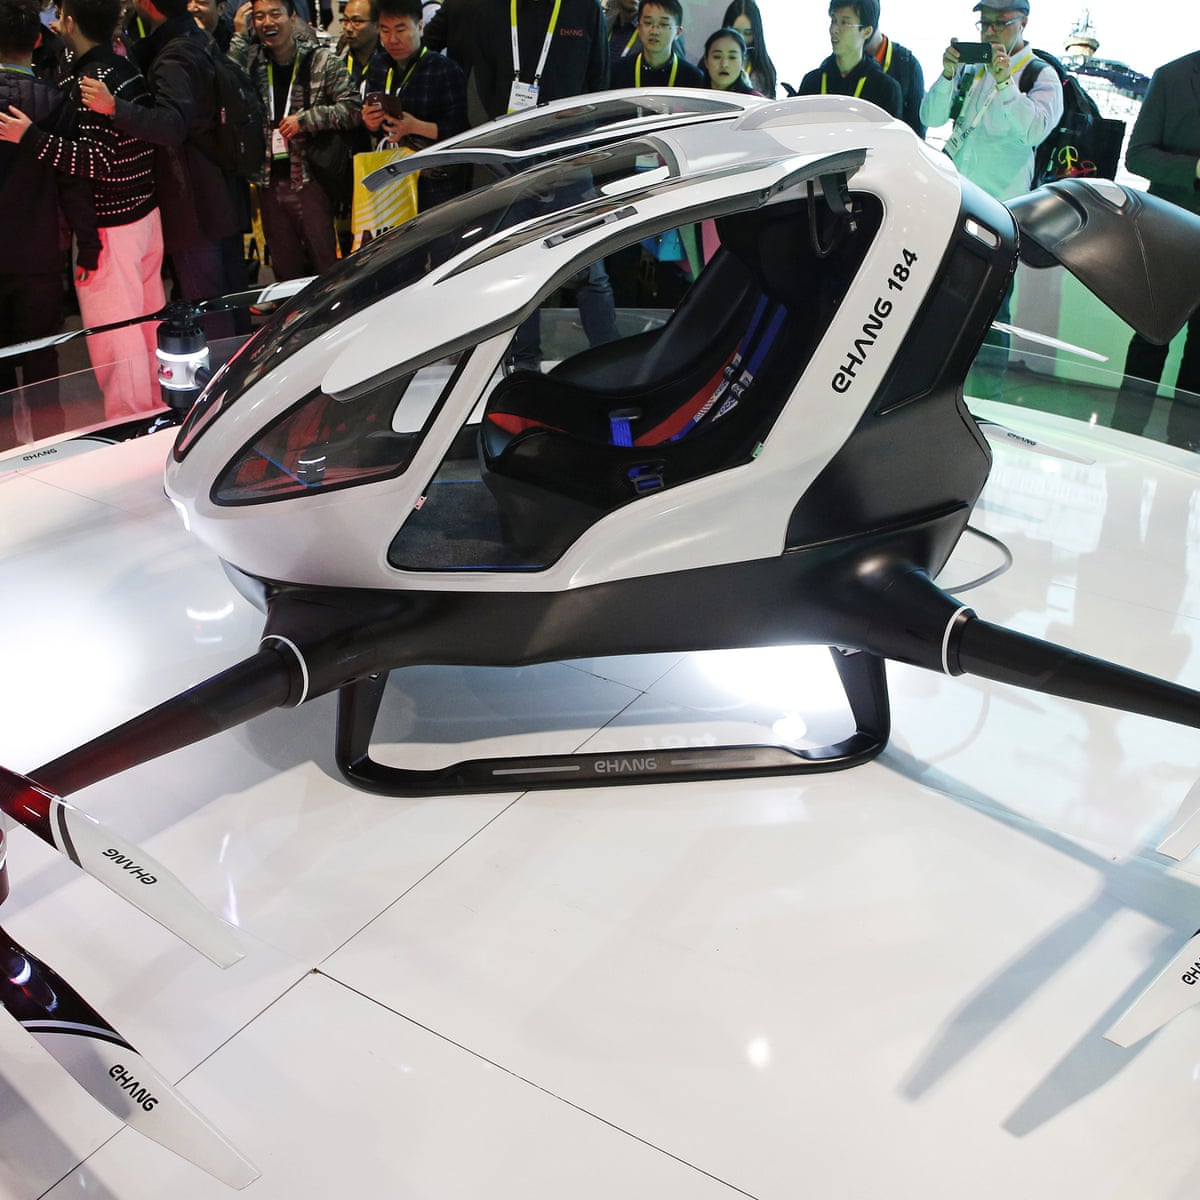 stribet stadig Påstand First passenger drone makes its debut at CES | CES 2016 | The Guardian